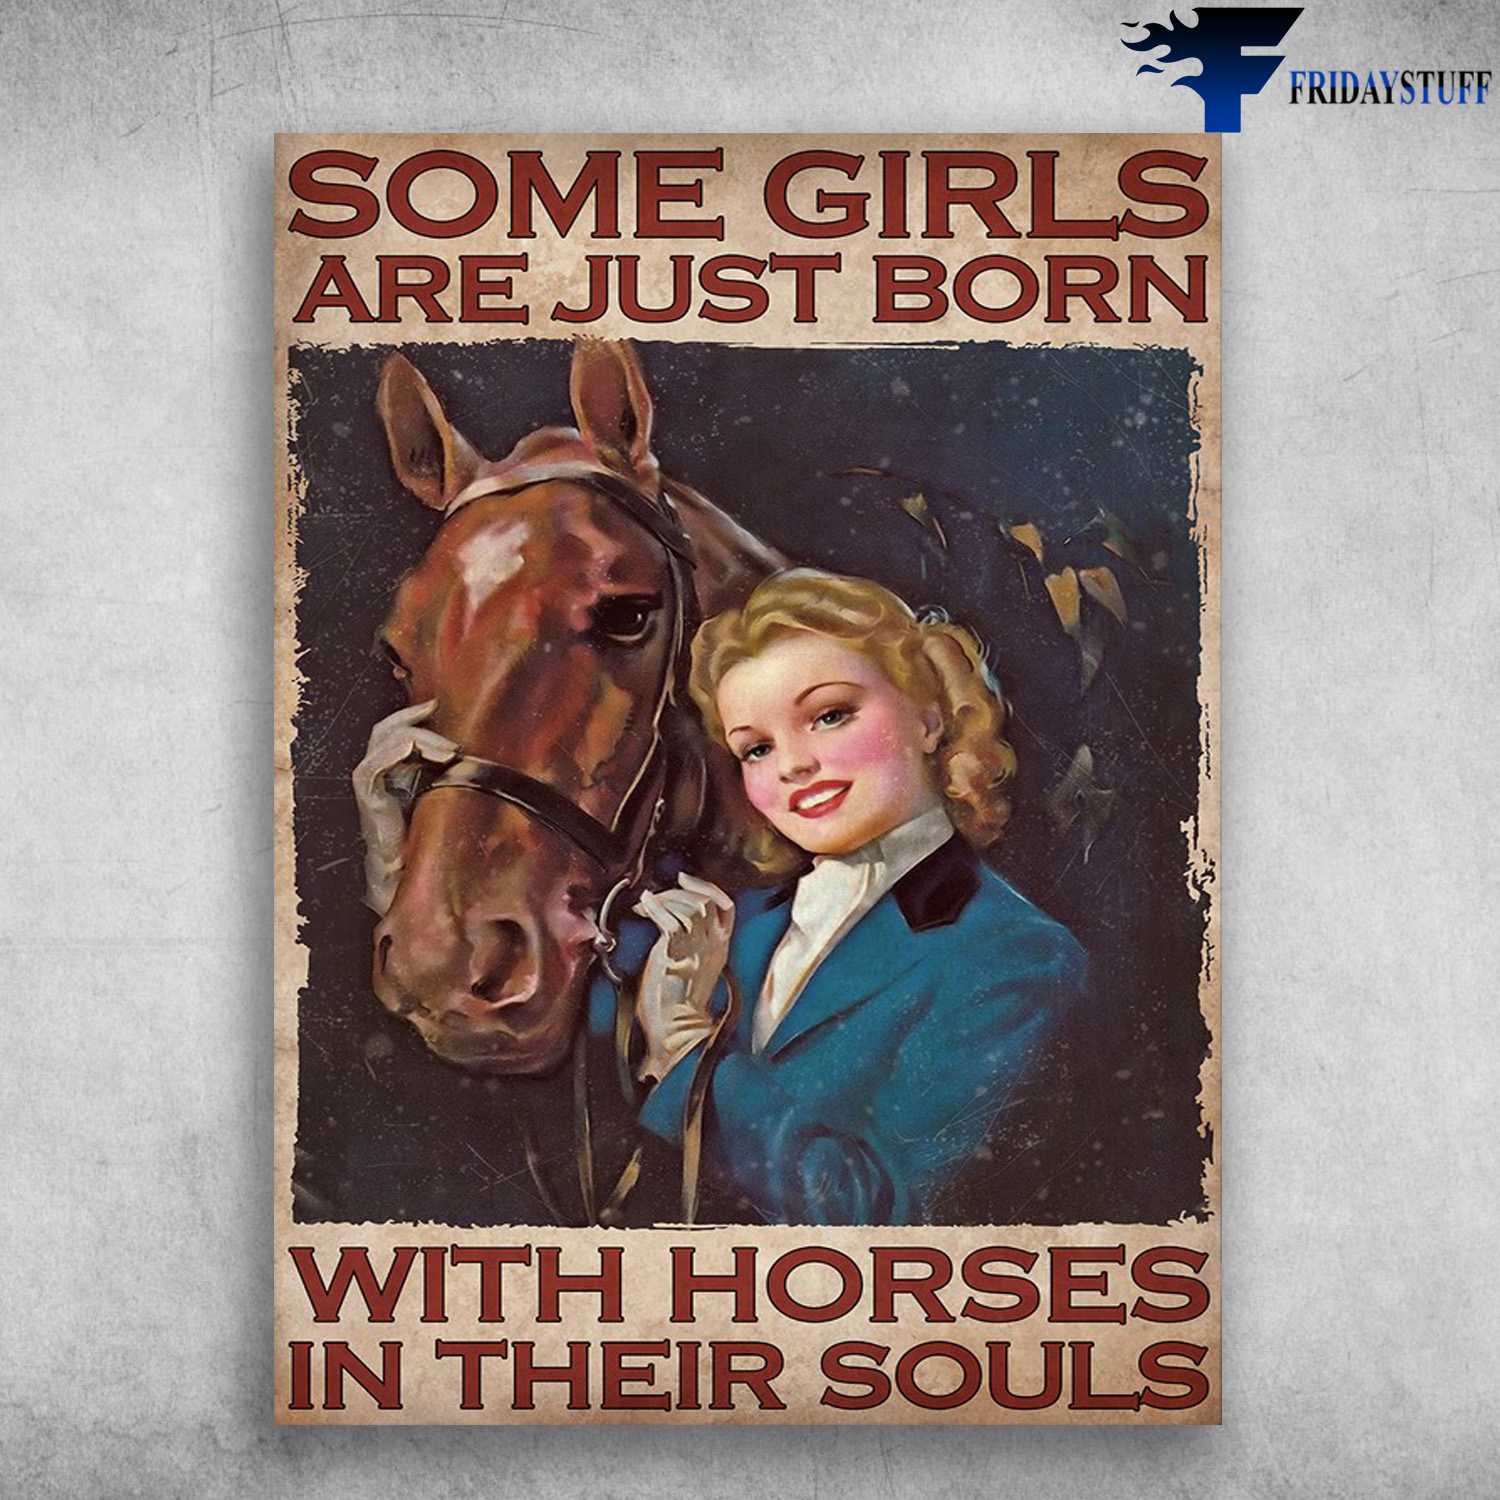 Lady And Horse - Some Girls Are Just Born, With Horses In Their Souls